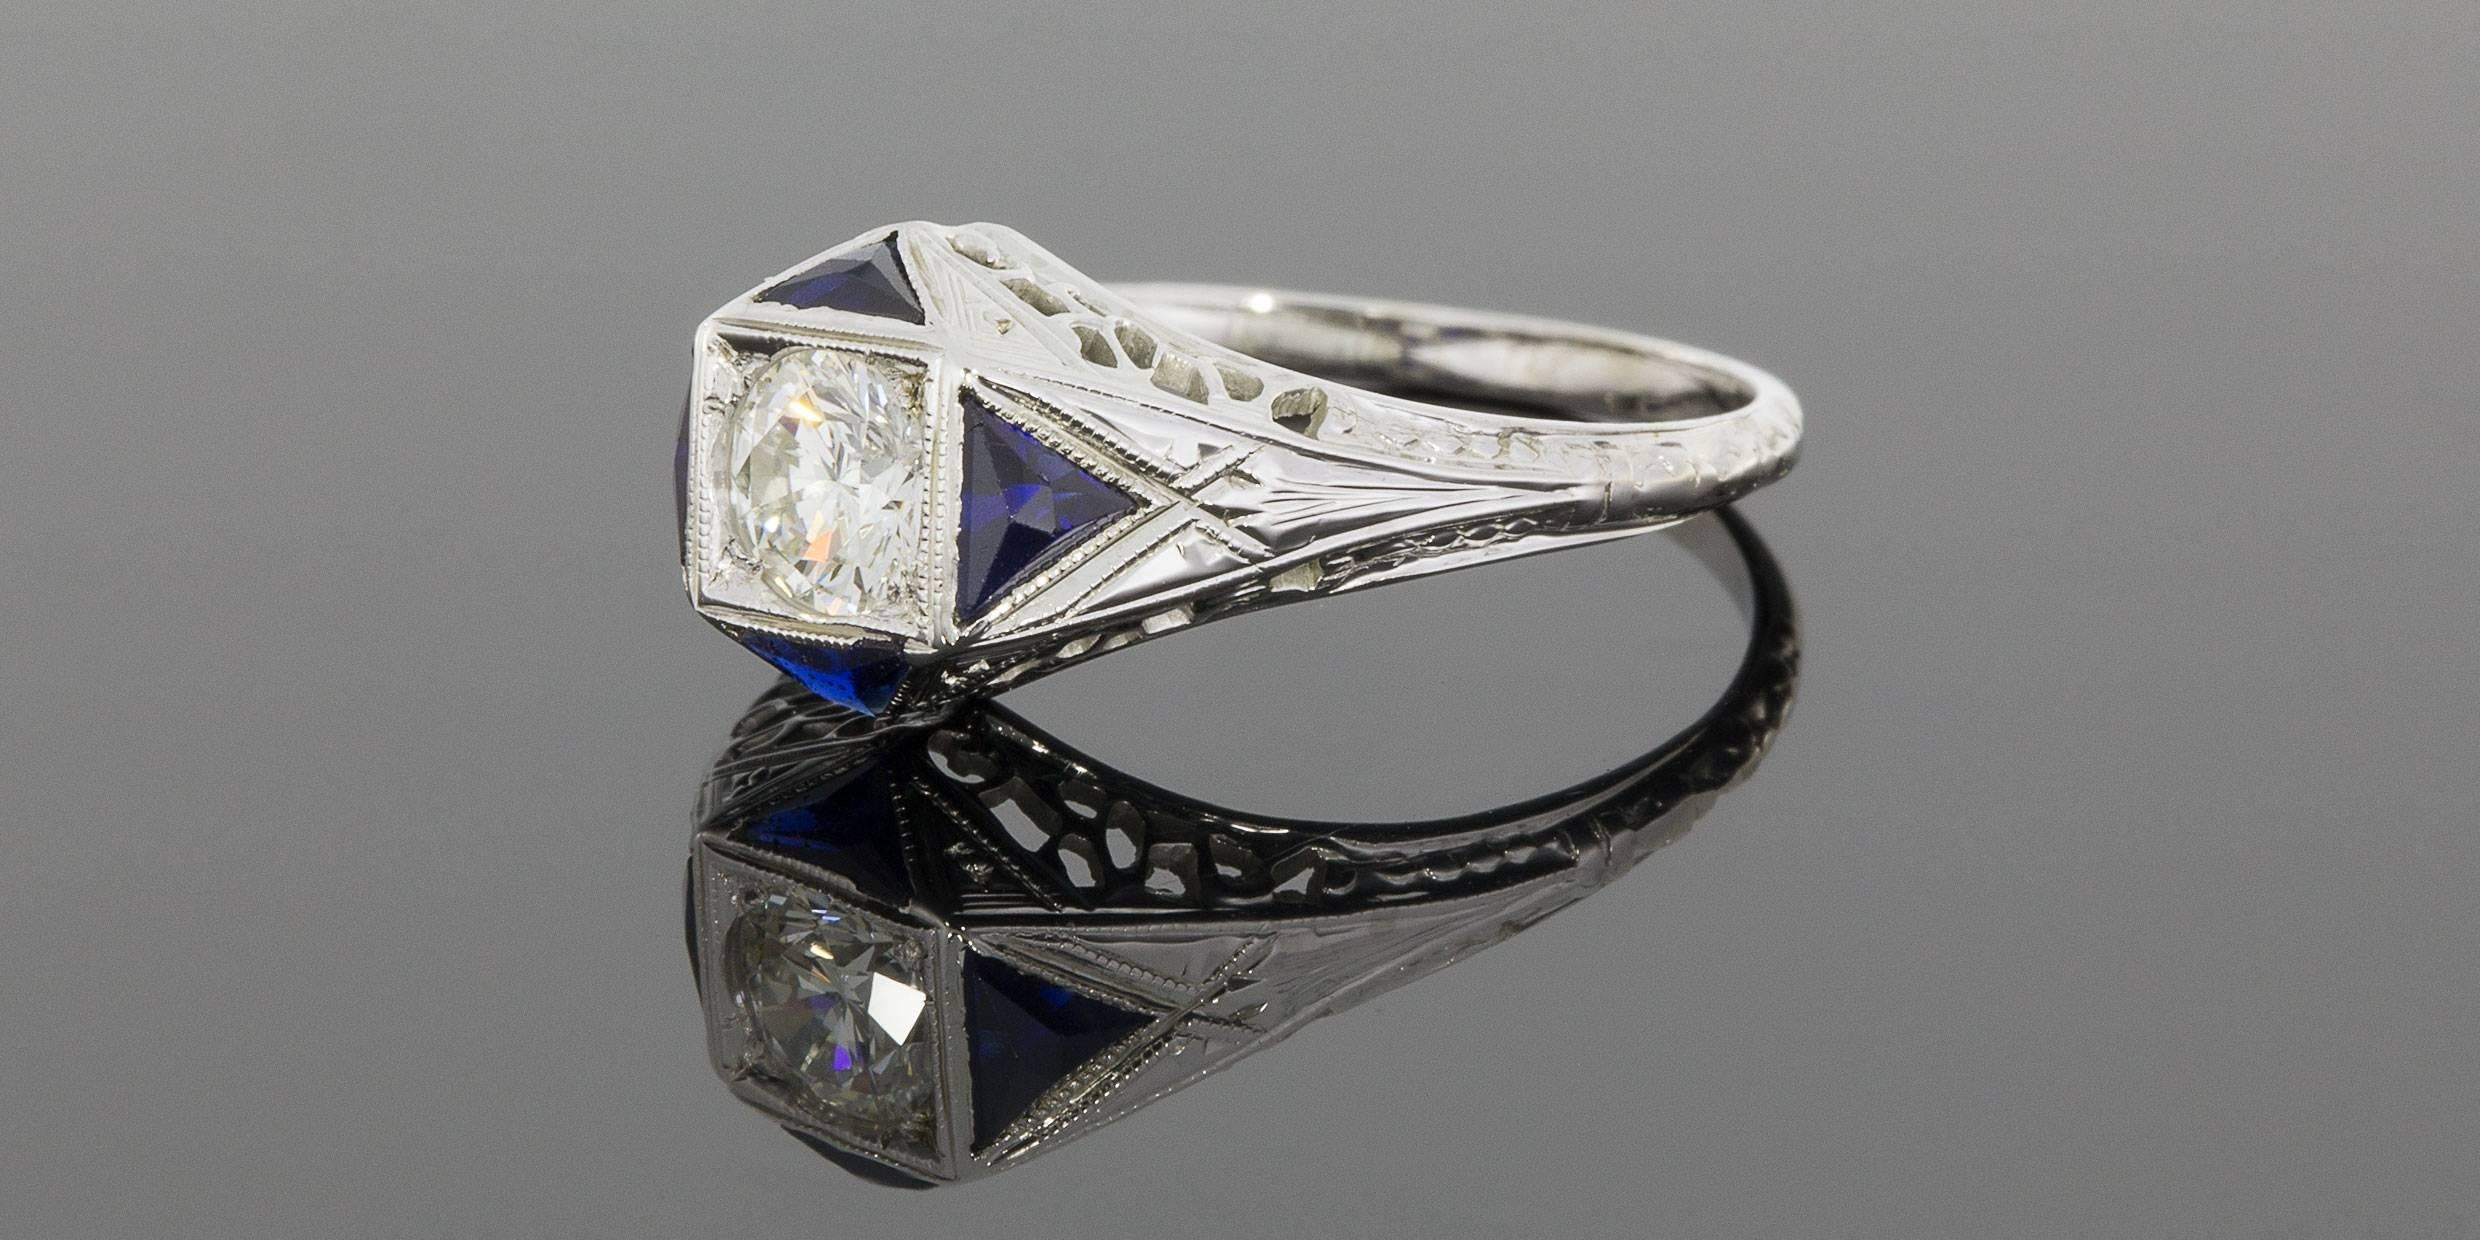 This beautiful, vintage ring features a 1/2 carat, round brilliant center diamond that is a G/VS2 in quality. This sparkling diamond is set in a milgrain accented, square shape in an 18 karat white gold ring. Pointing out from the square shaped